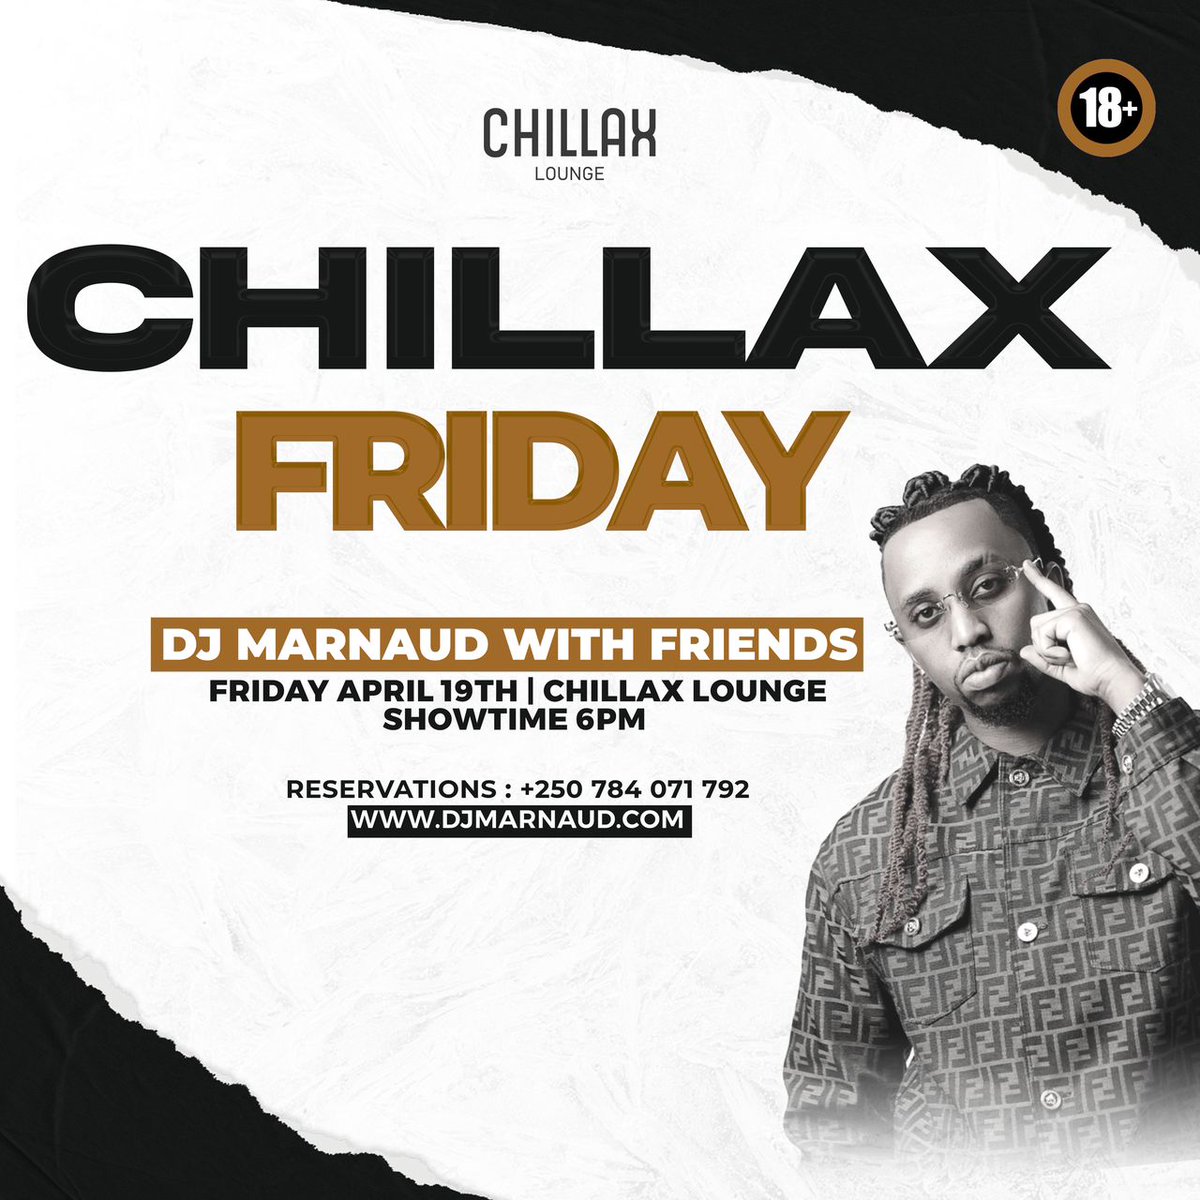 It's today at Chillax Lounge 🔥🔥🔥 Your favorite Dj @DjMarnaud will be with his friends and hope y'all know the vibes💃🕺👯